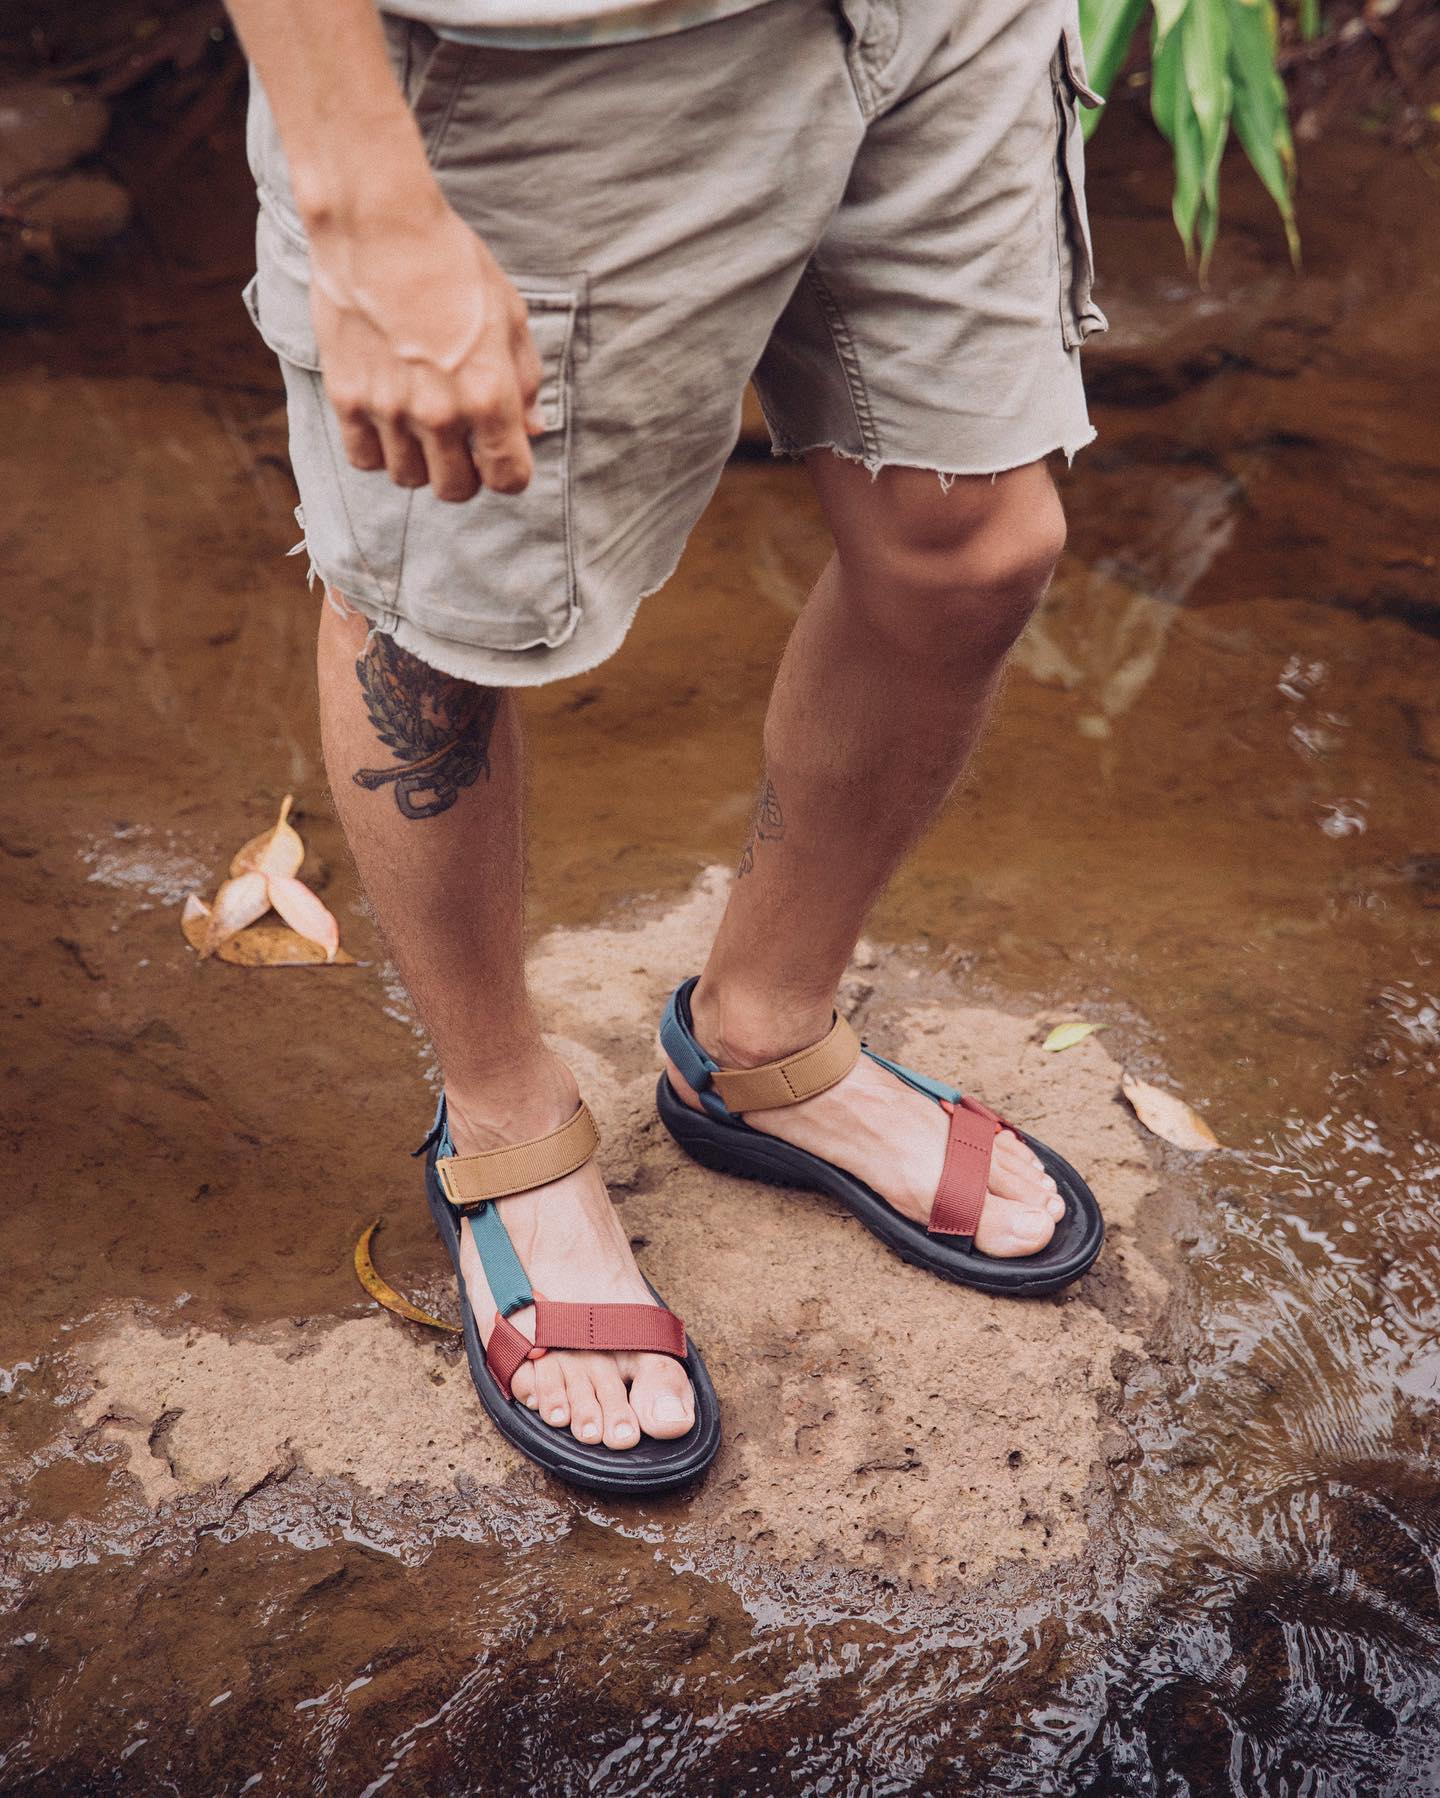 The 18 Best Waterproof Shoes For Men To Keep Your Feet Dry - Fashnfly